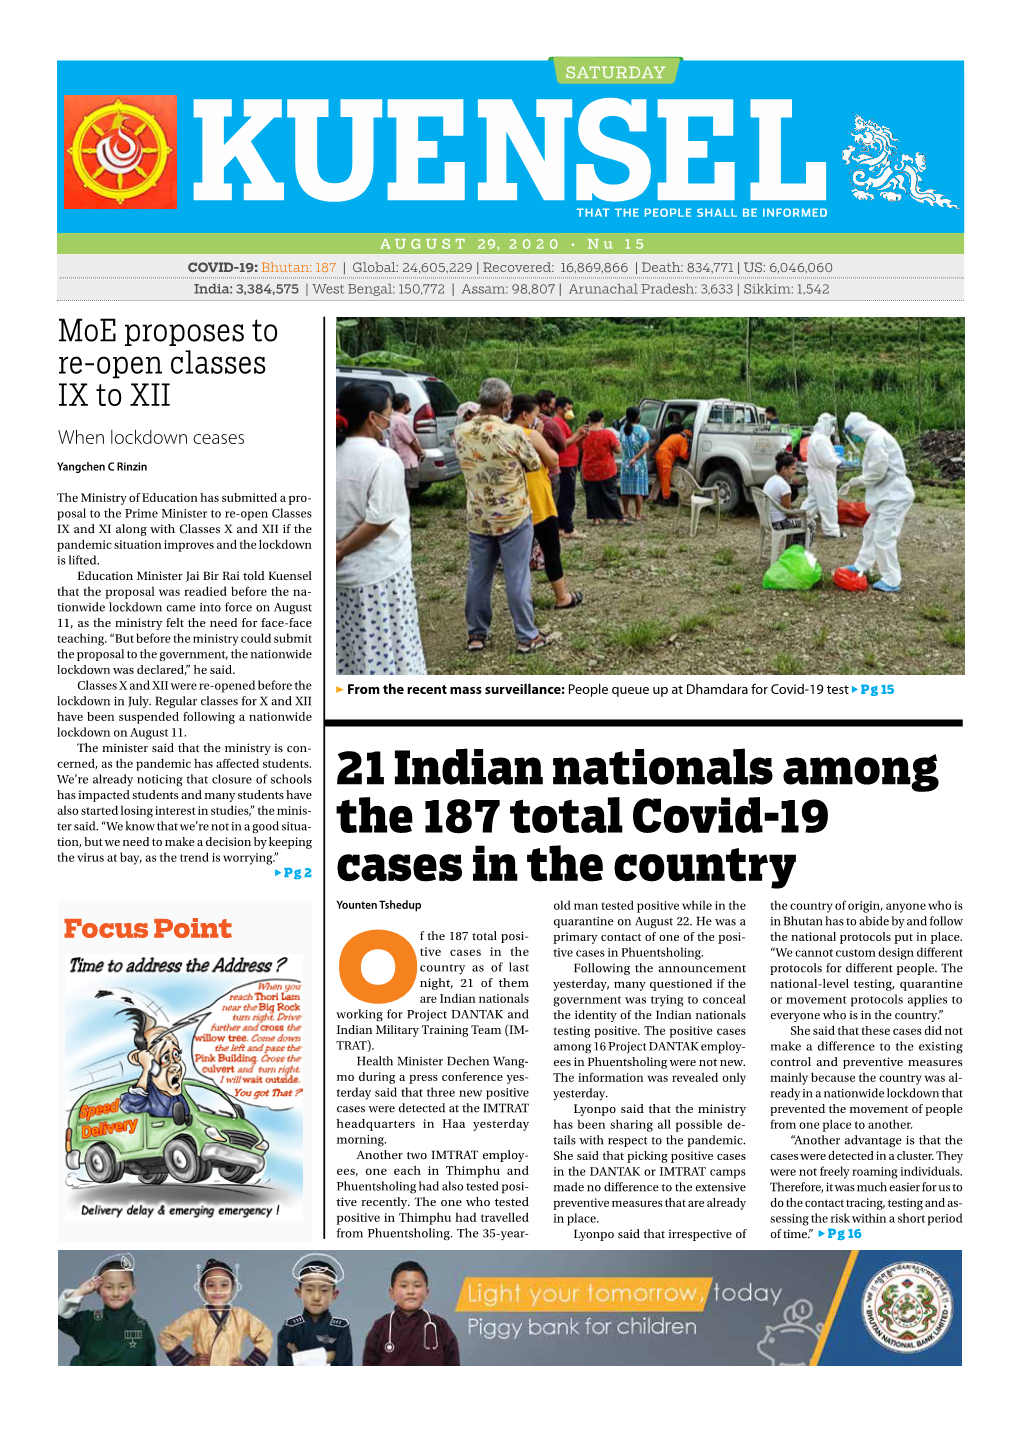 21 Indian Nationals Among the 187 Total Covid-19 Cases in the Country